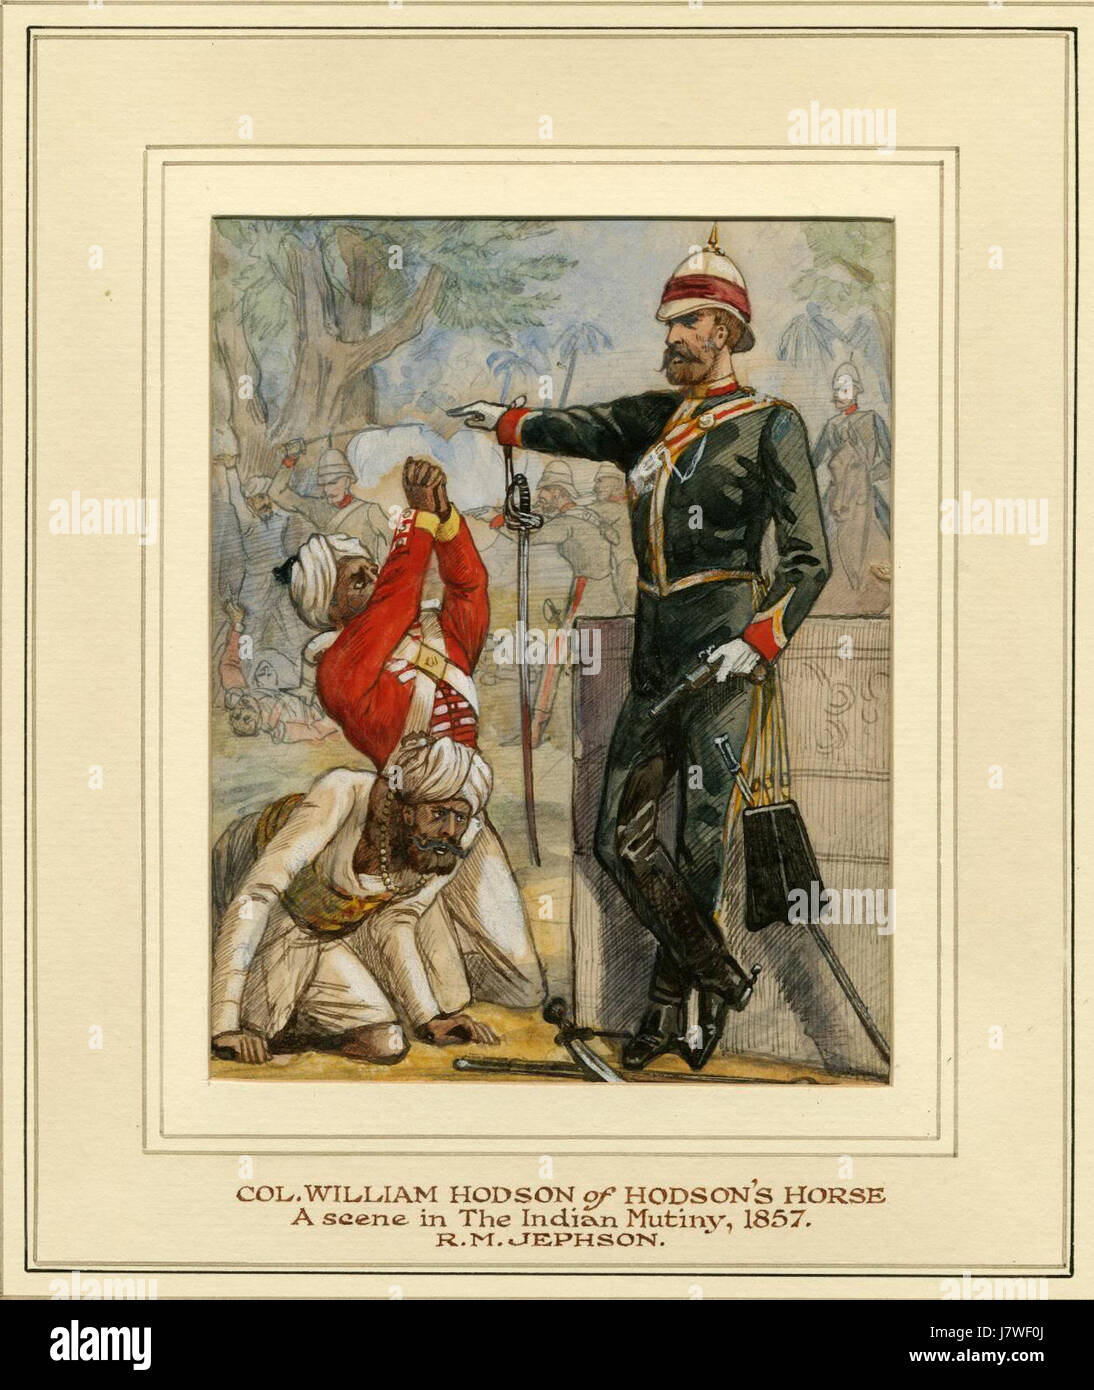 COL.WILLIAM HODSON of HODSON'S HORSE A scene in The Indian Mutiny, 1857 Stock Photo